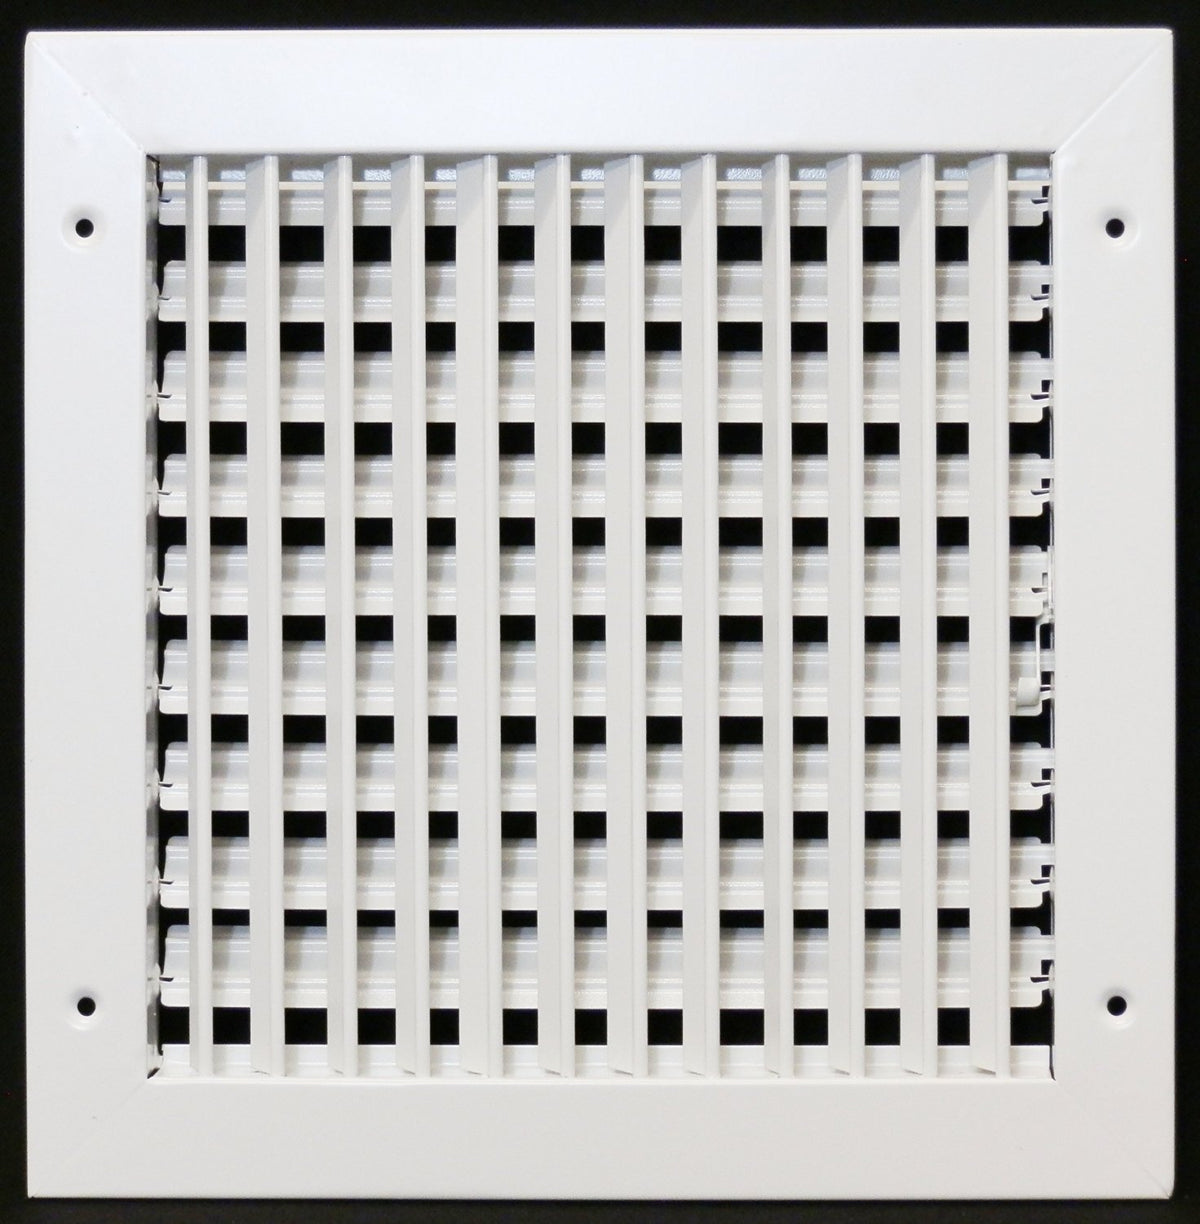 14&quot; X 12&quot; ADJUSTABLE AIR SUPPLY DIFFUSER - HVAC Vent Duct Cover Sidewall or Ceiling